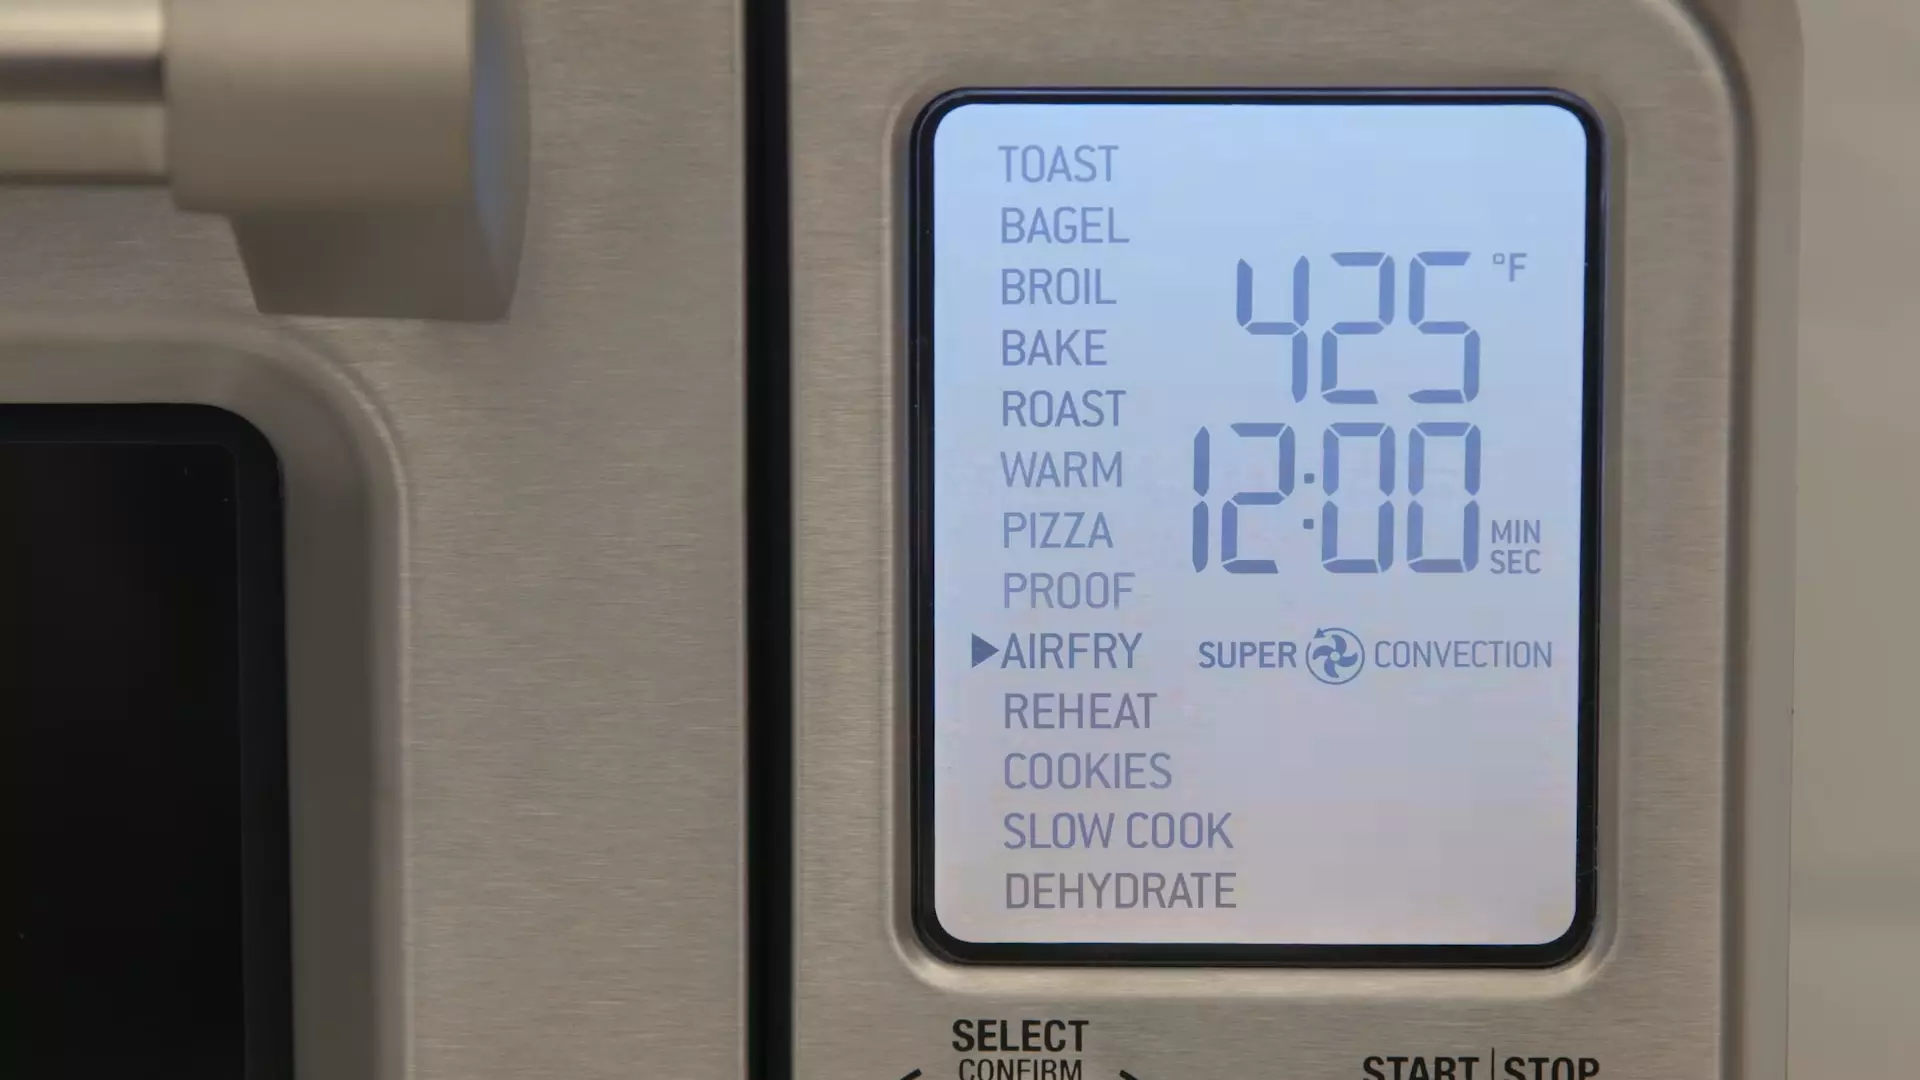 atus light on a Breville smart oven